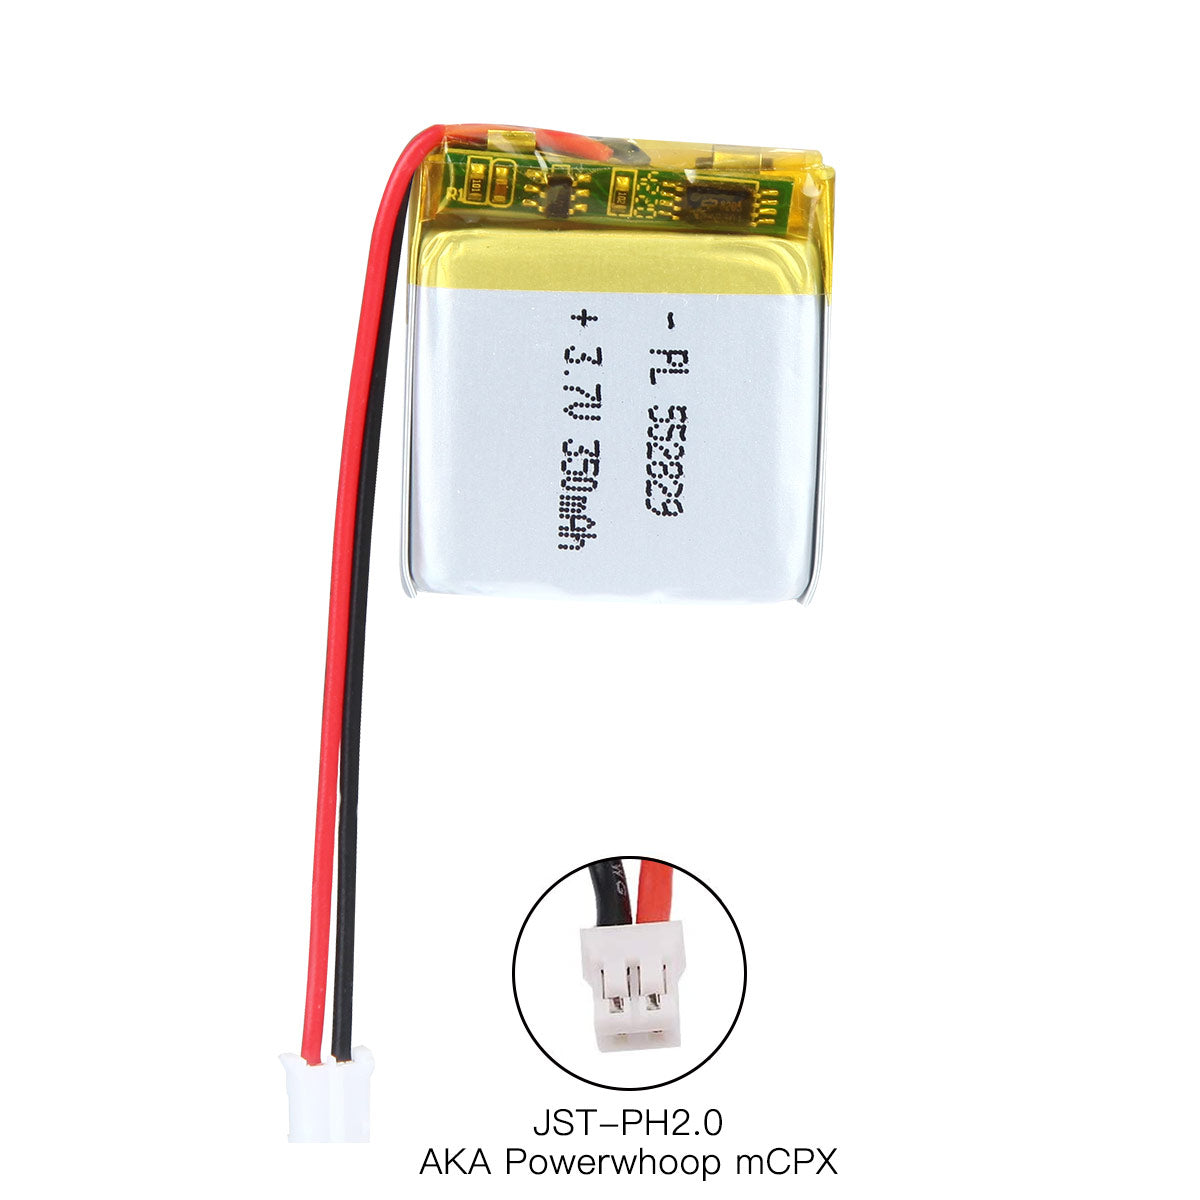 YDL 3.7V 350mAh 552829 Rechargeable Lithium Polymer Battery Length 31mm